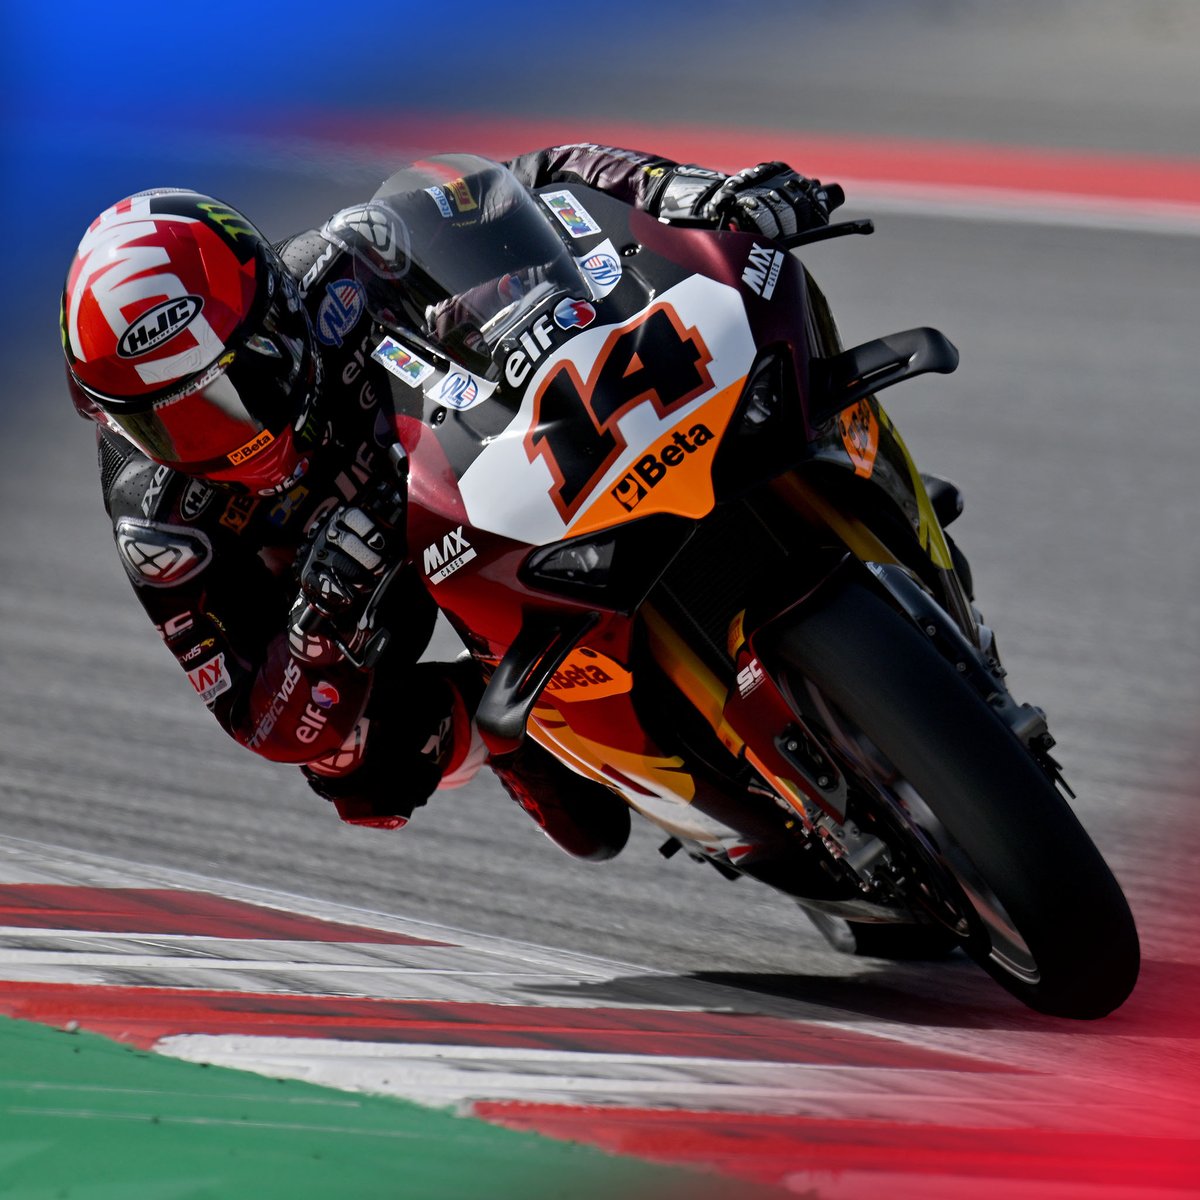 #ElfMarcVDSRacingTeam’s @SamLowes_22 gained a lot of #WorldSBK experience last weekend in Barcelona, leading the Superpole race before finishing 11th, and collecting 4 more points with 12th in Race 2! 🏁 Let’s go! 💪 #ELF @ElfMarcVDS